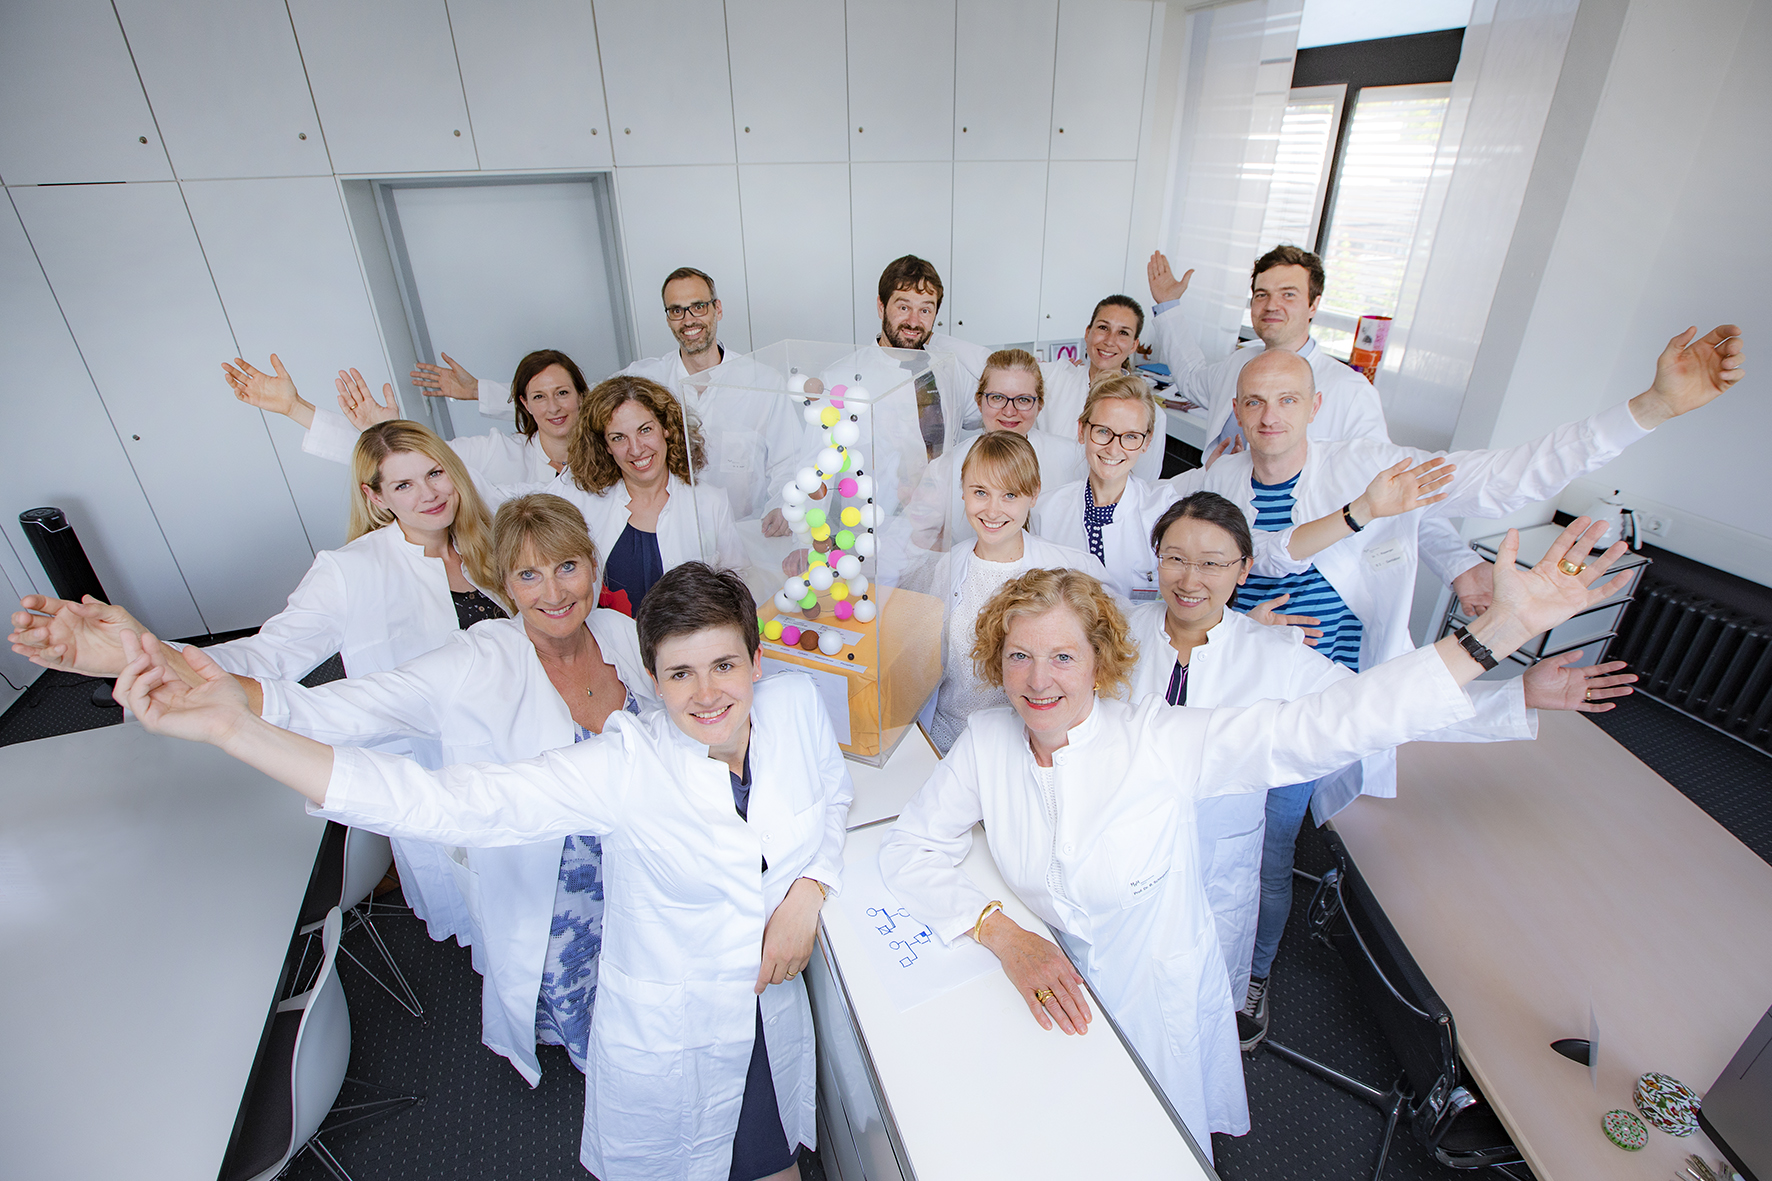 Team of doctors consisting of specialists and doctors in training with their hands in the air.